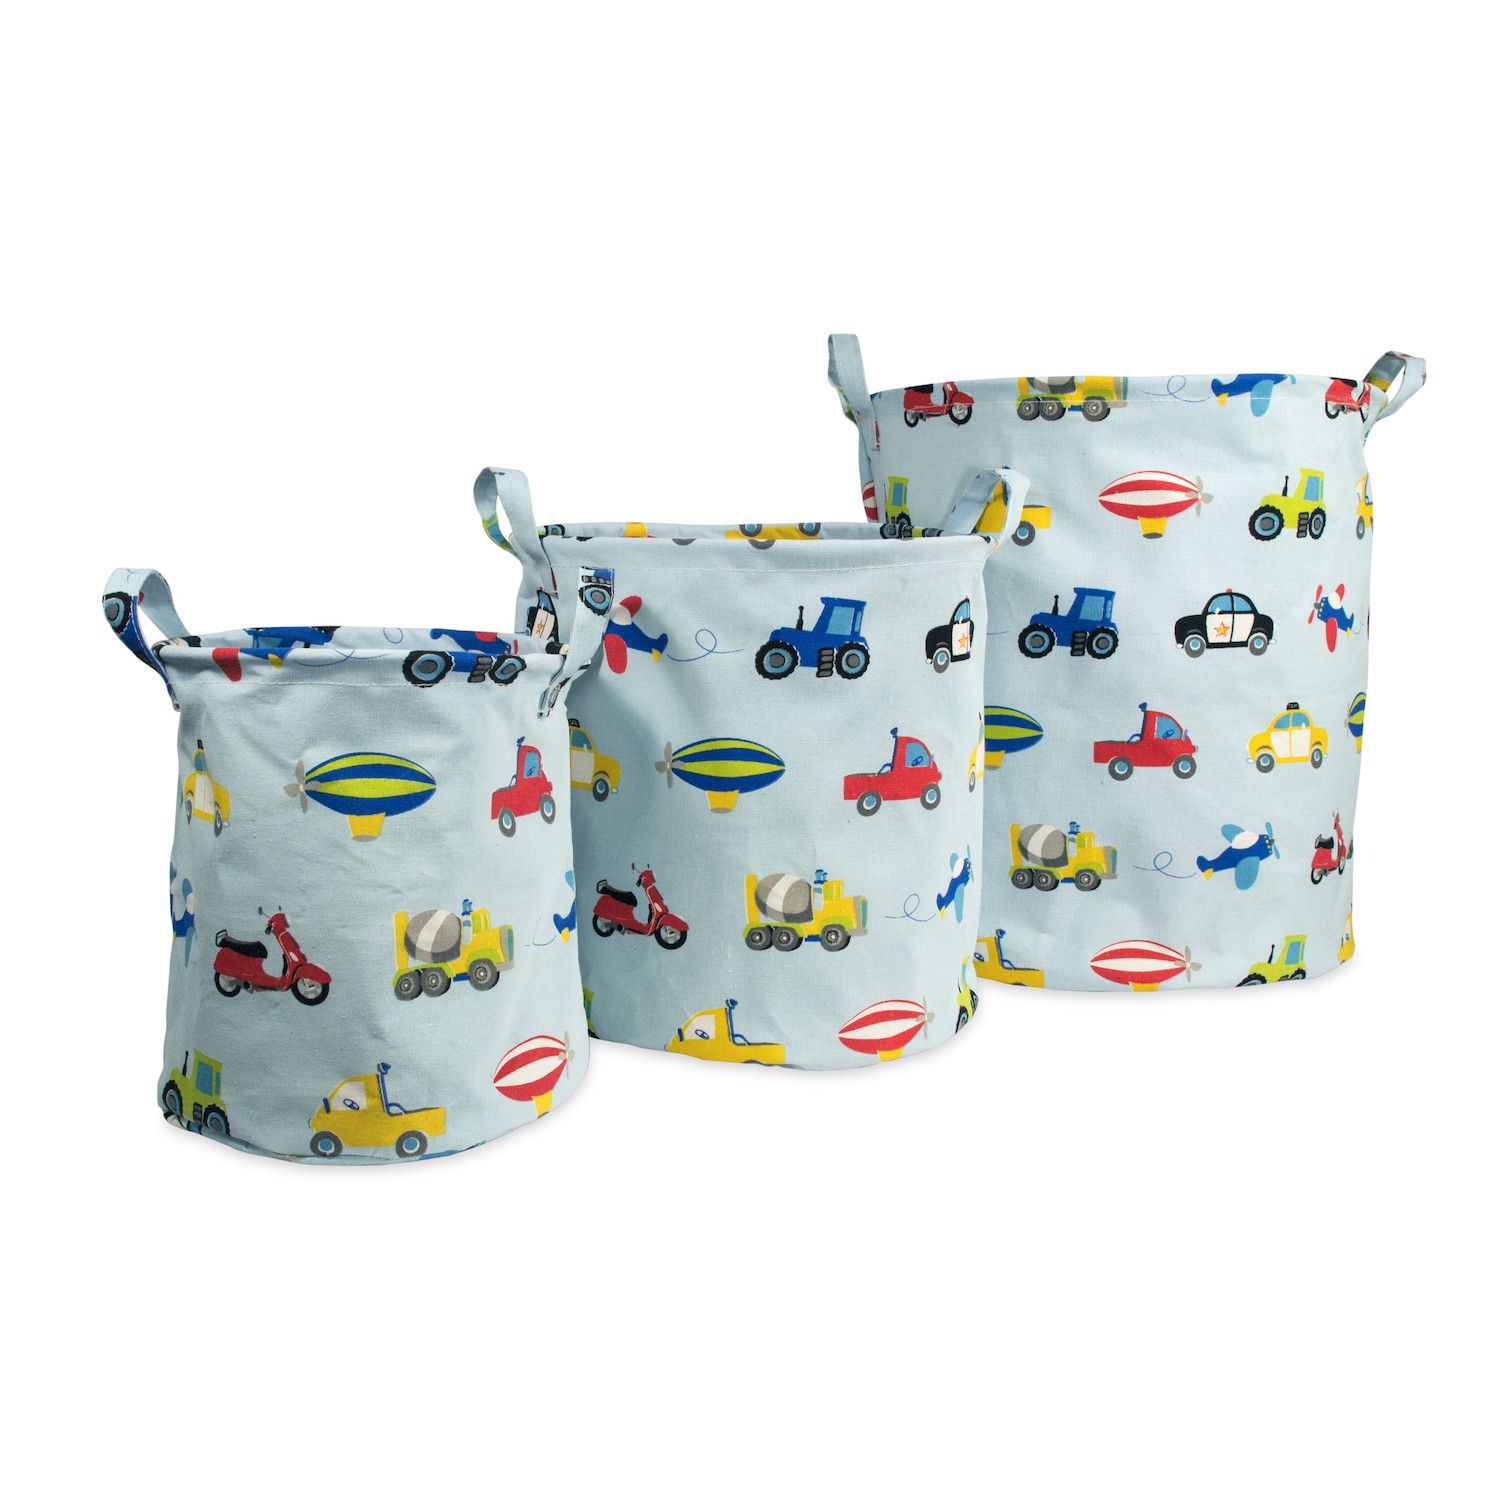 Image for Dream Factory Trains and Trucks 3-Piece Storage Bins at Kohl's.